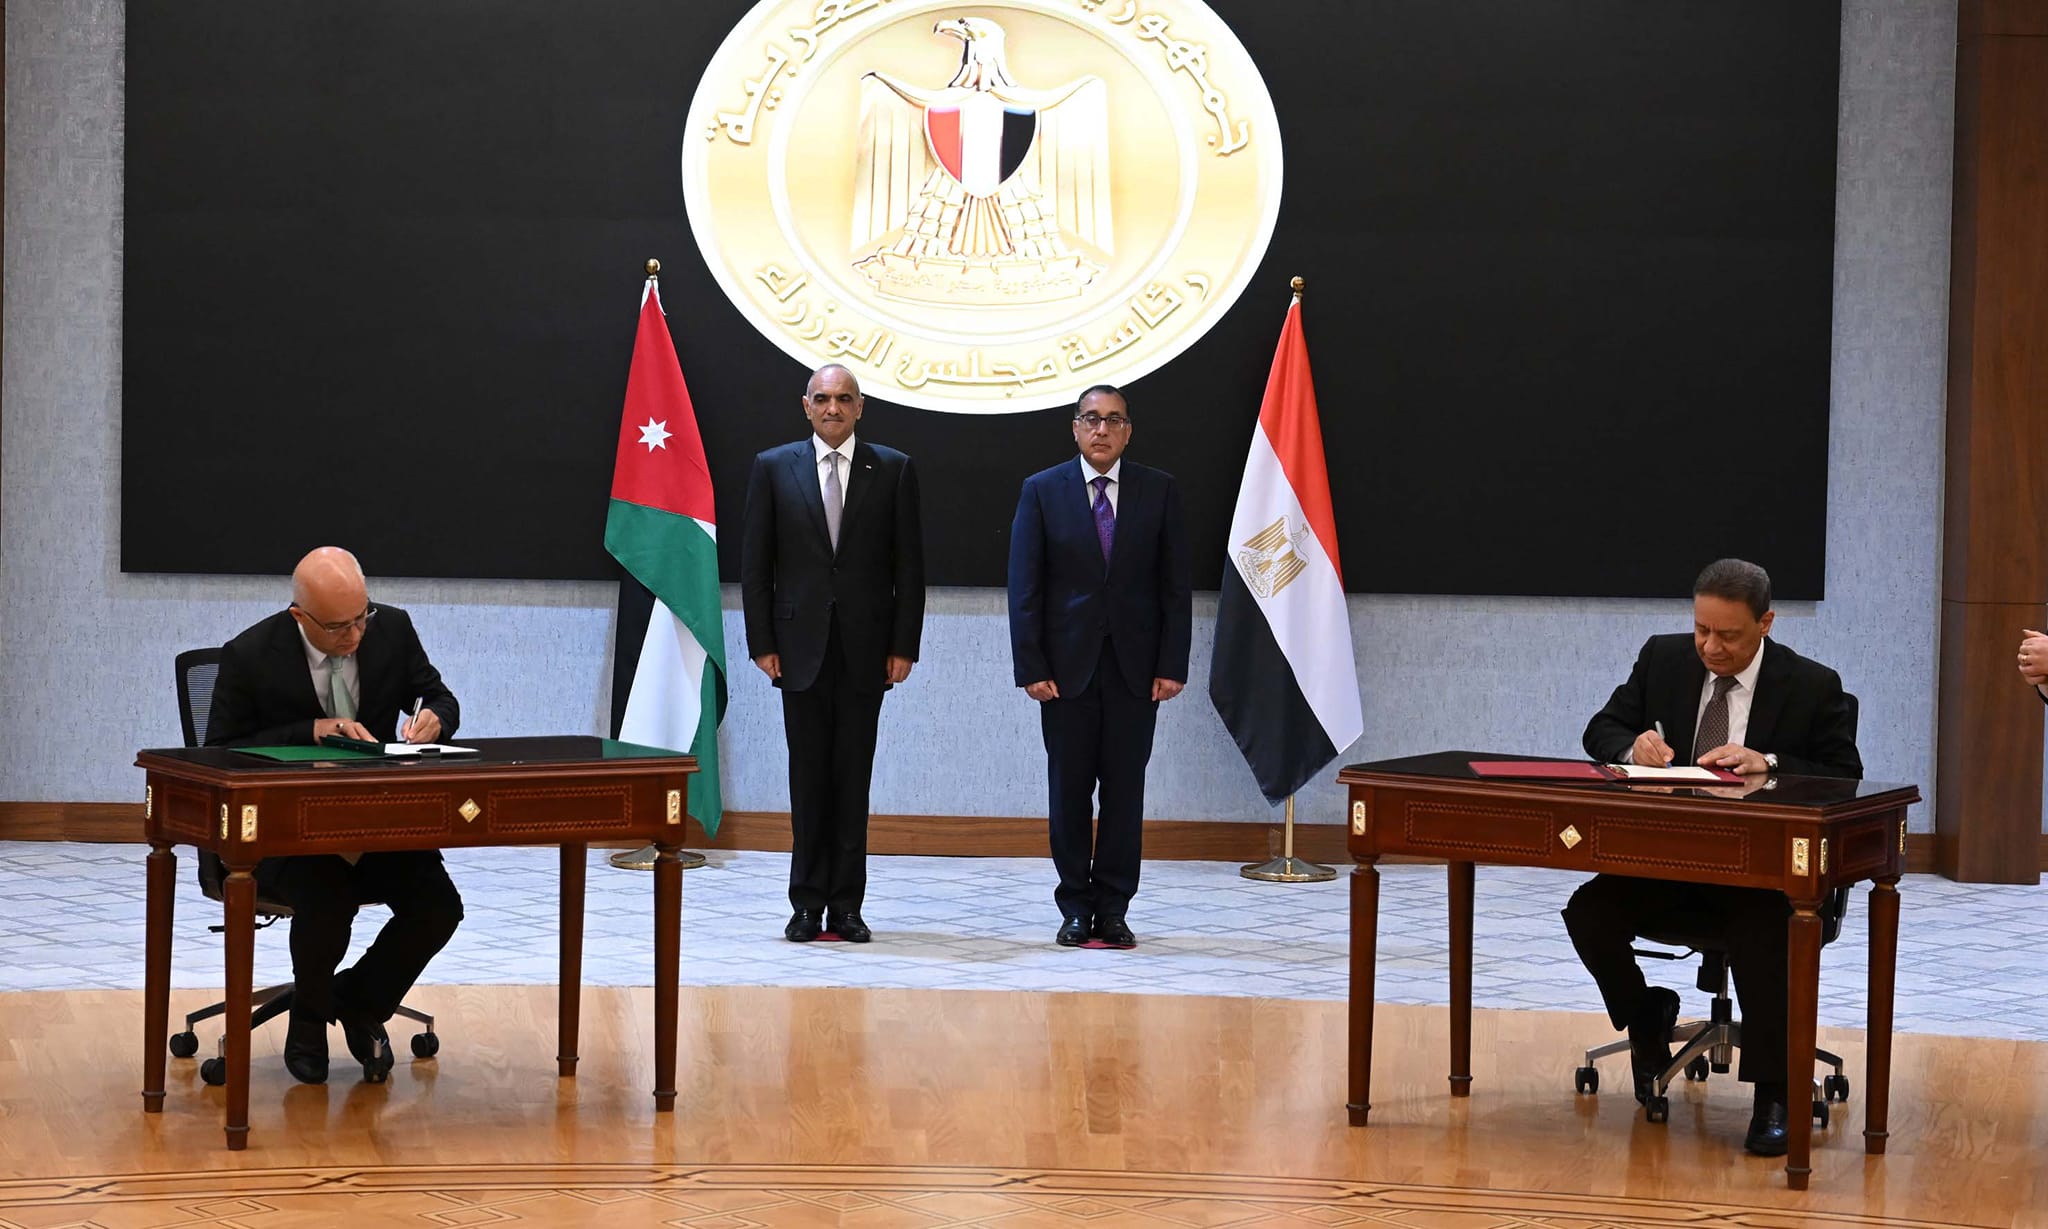 The Prime Ministers of Egypt and Jordan sign the minutes of the meetings of the 32nd session of the Joint Egyptian-Jordanian Higher Committee